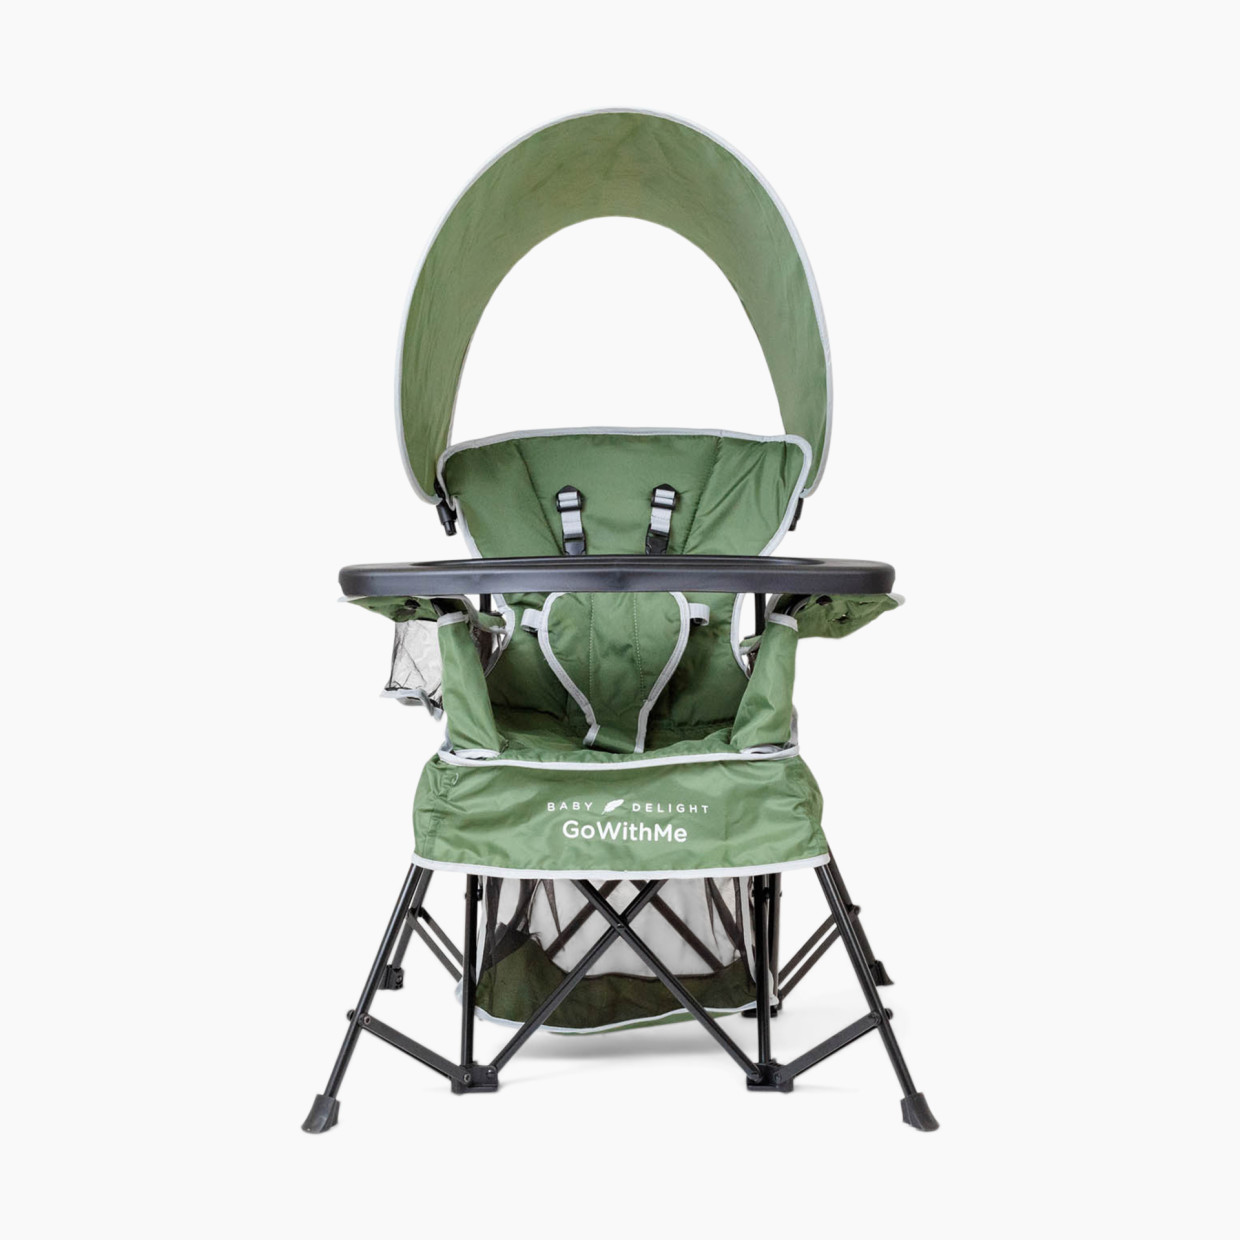 Baby Delight Go With Me Venture Deluxe Portable Chair - Moss Bud.